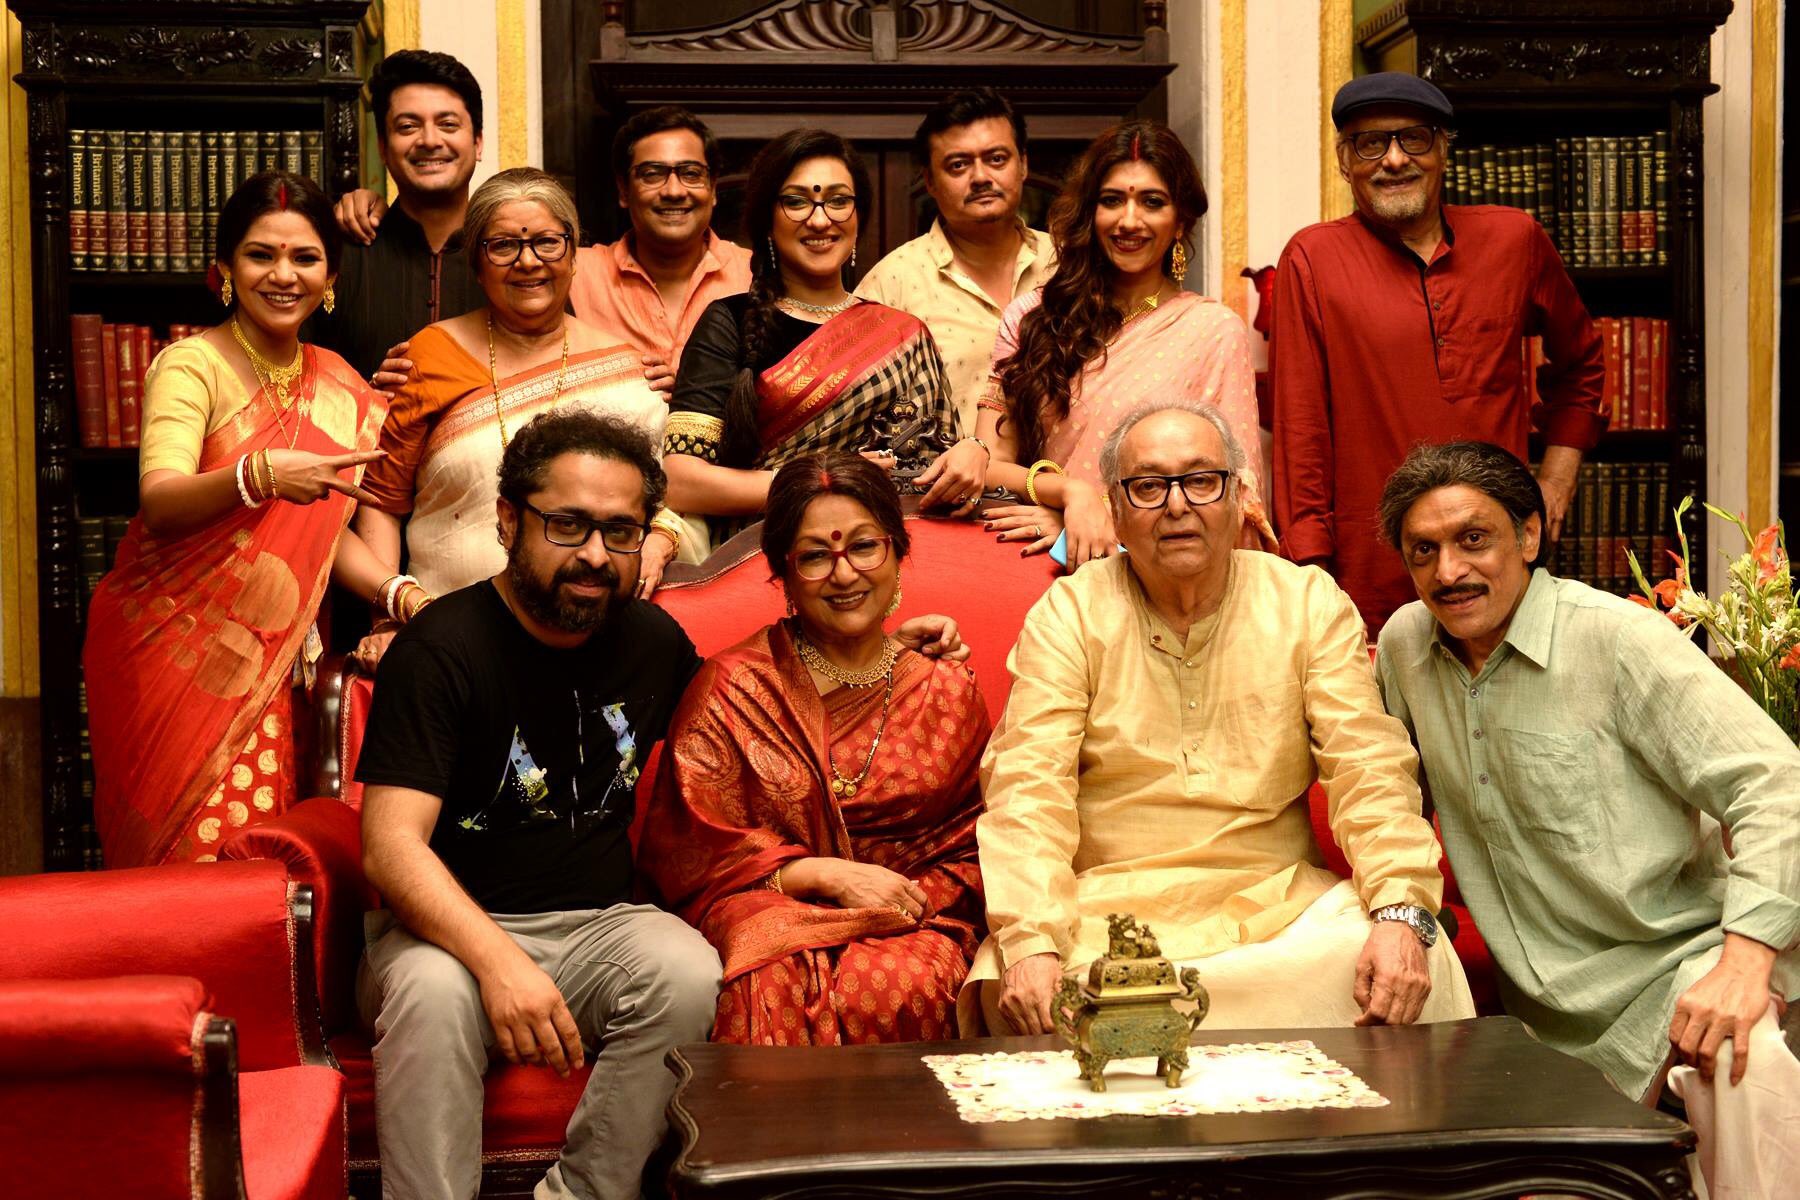 A very Happy Birthday to the one and only Aparna Sen from the Basu Poribaar team. 